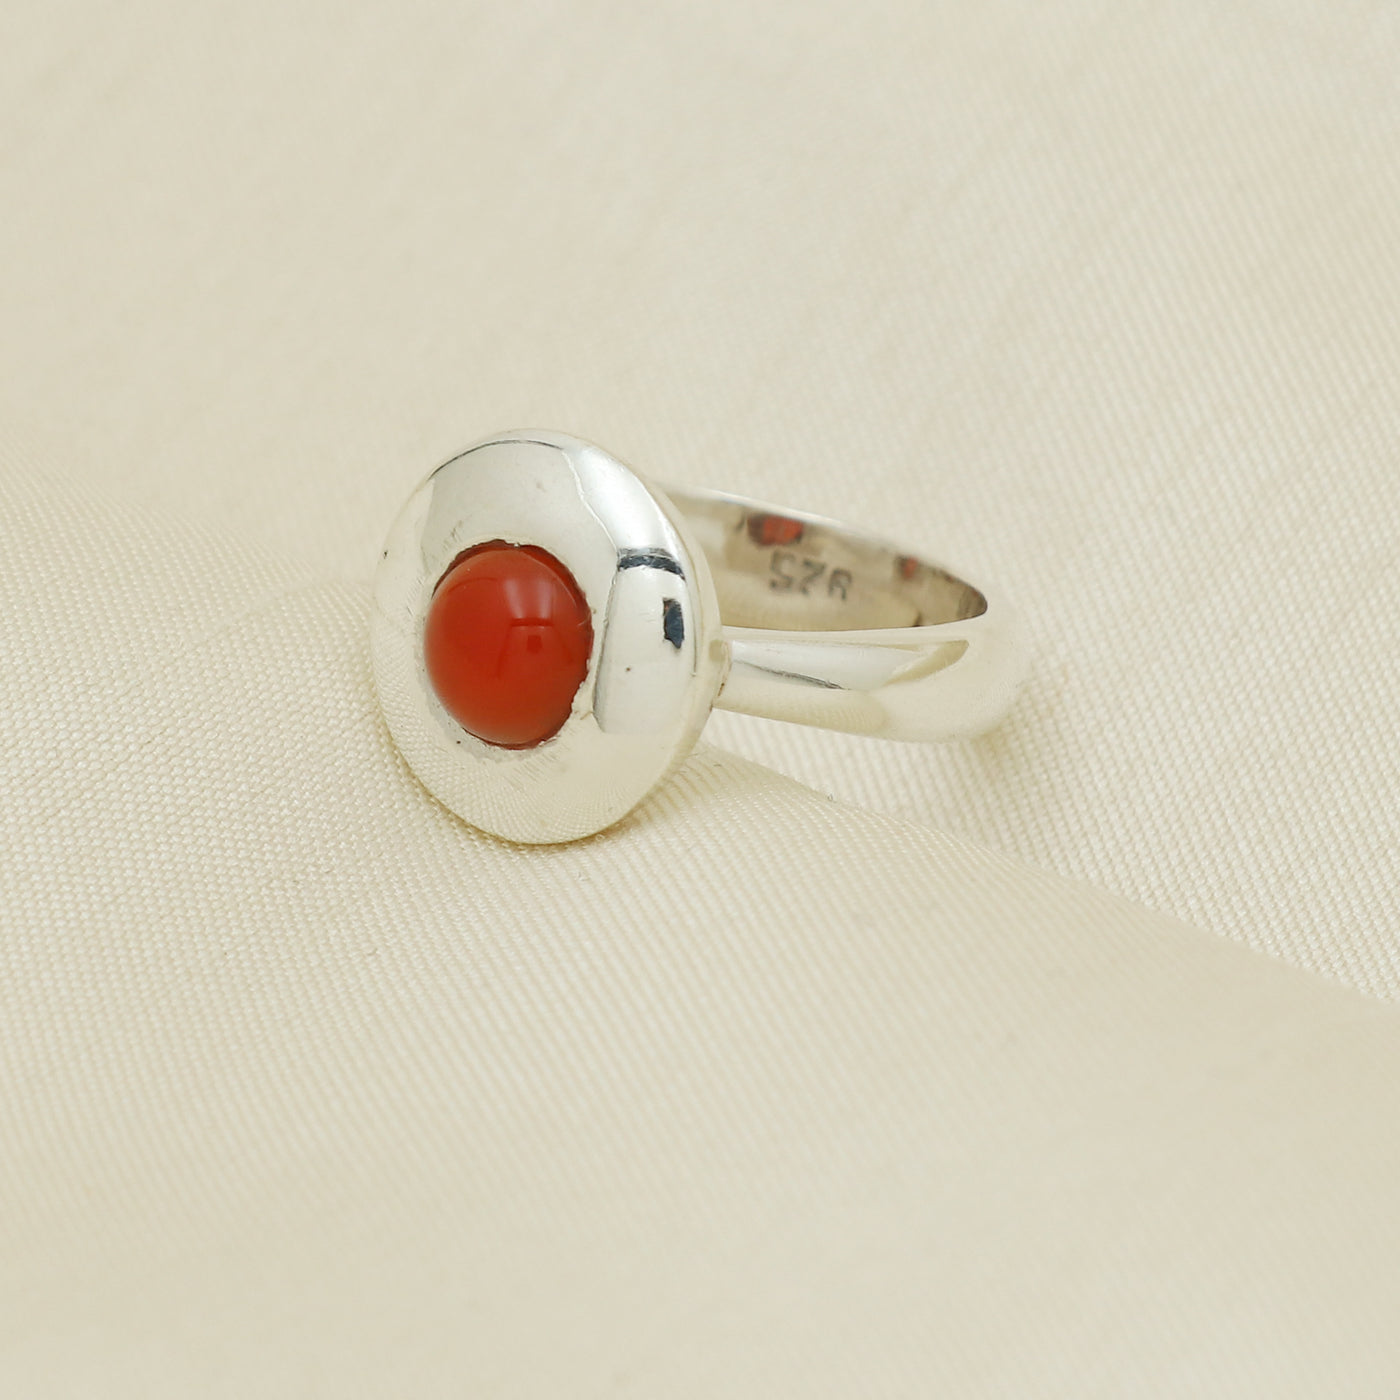 Classic Halo Red Onyx Ring